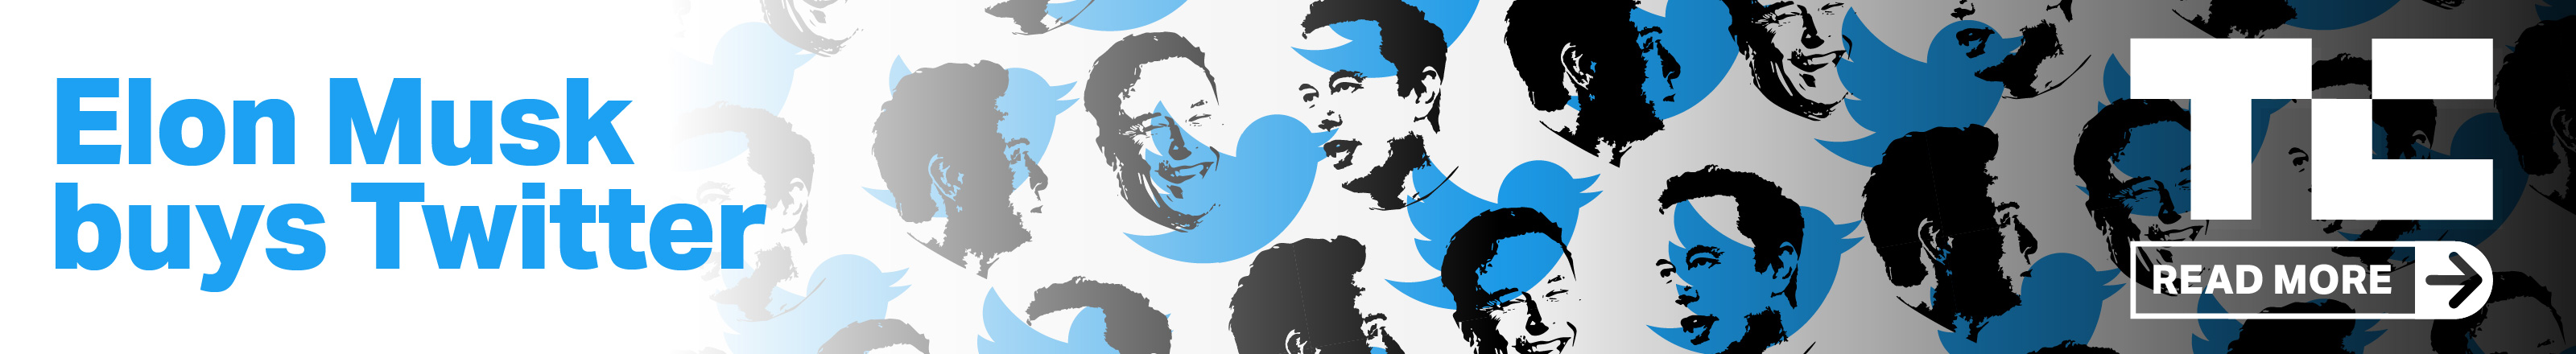 Read more about Elon Musk's purchase of Twitter on Tausi Insider